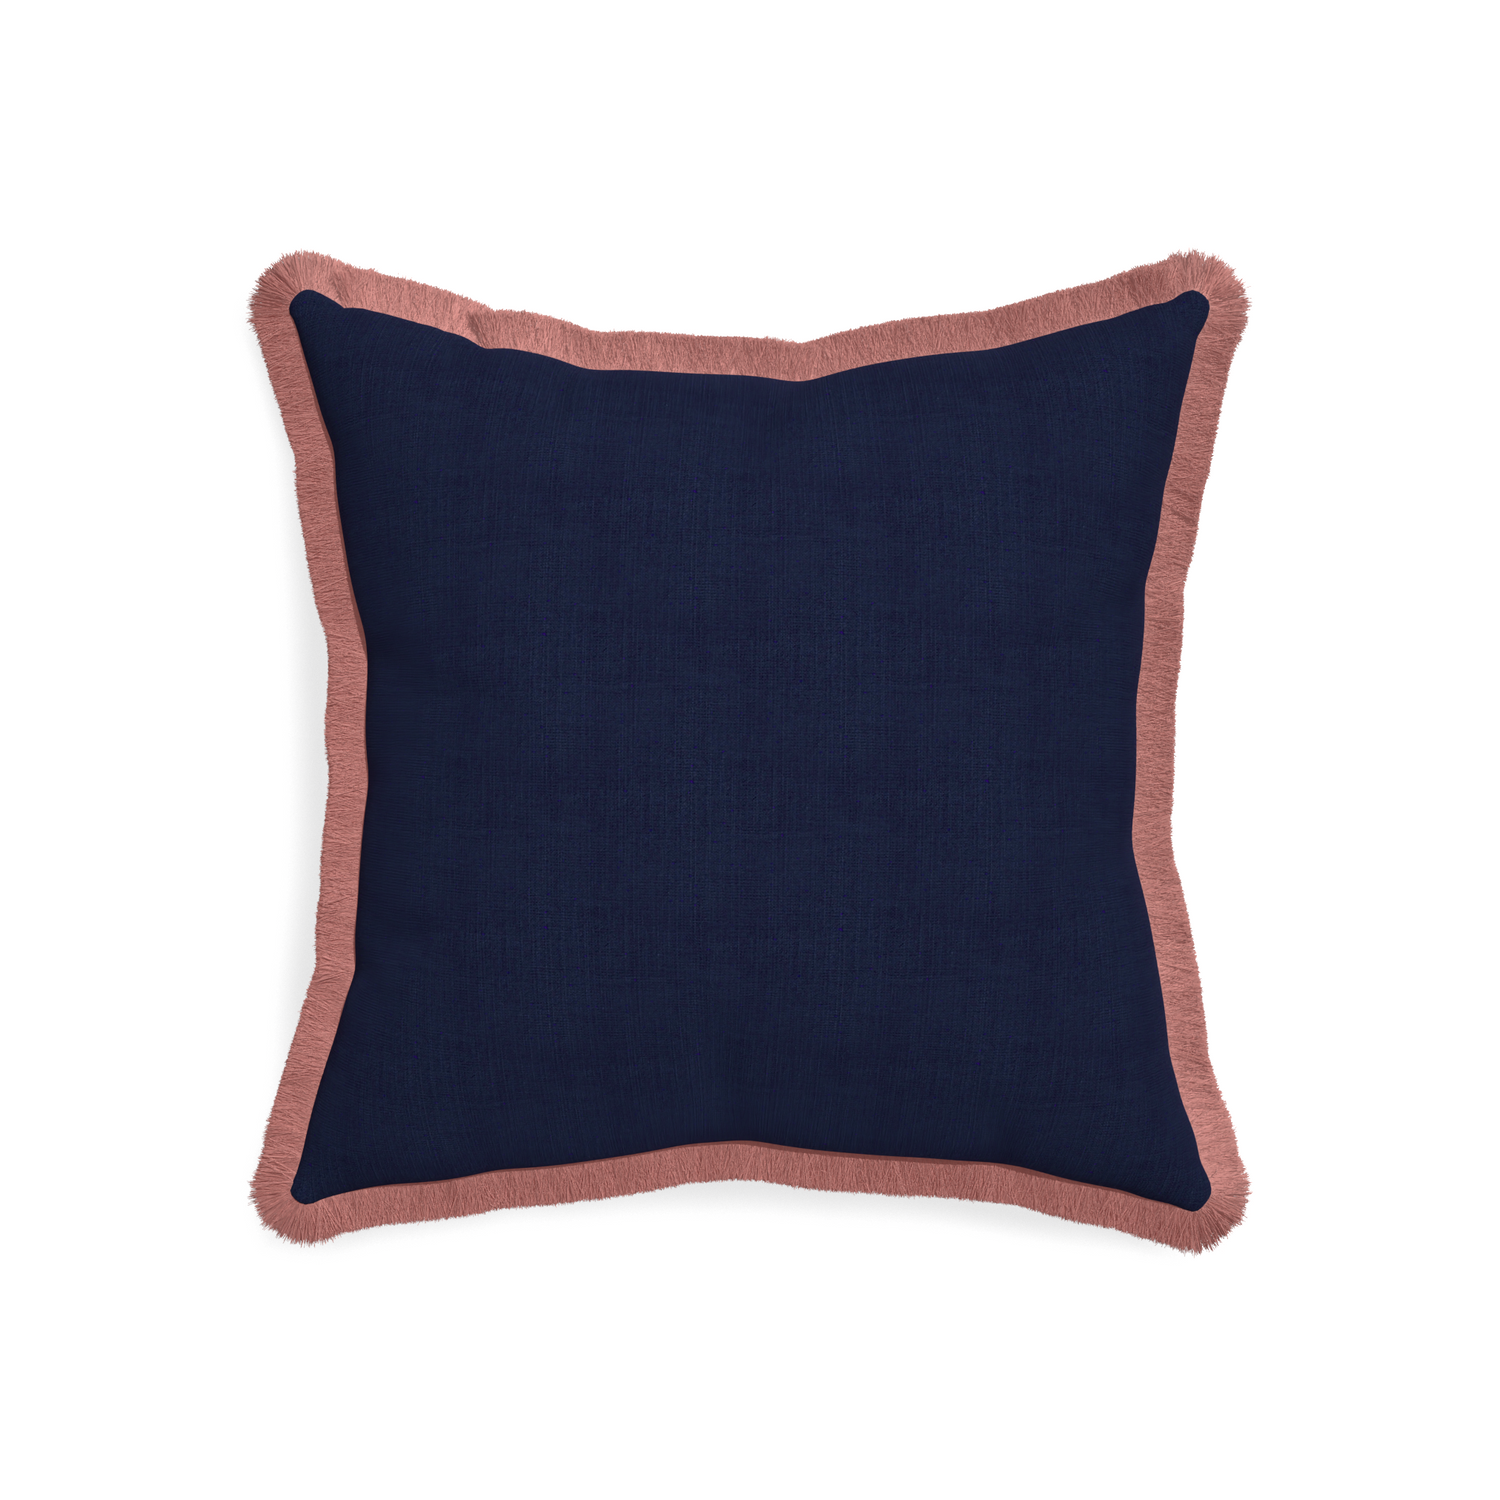 20-square midnight custom navy bluepillow with d fringe on white background